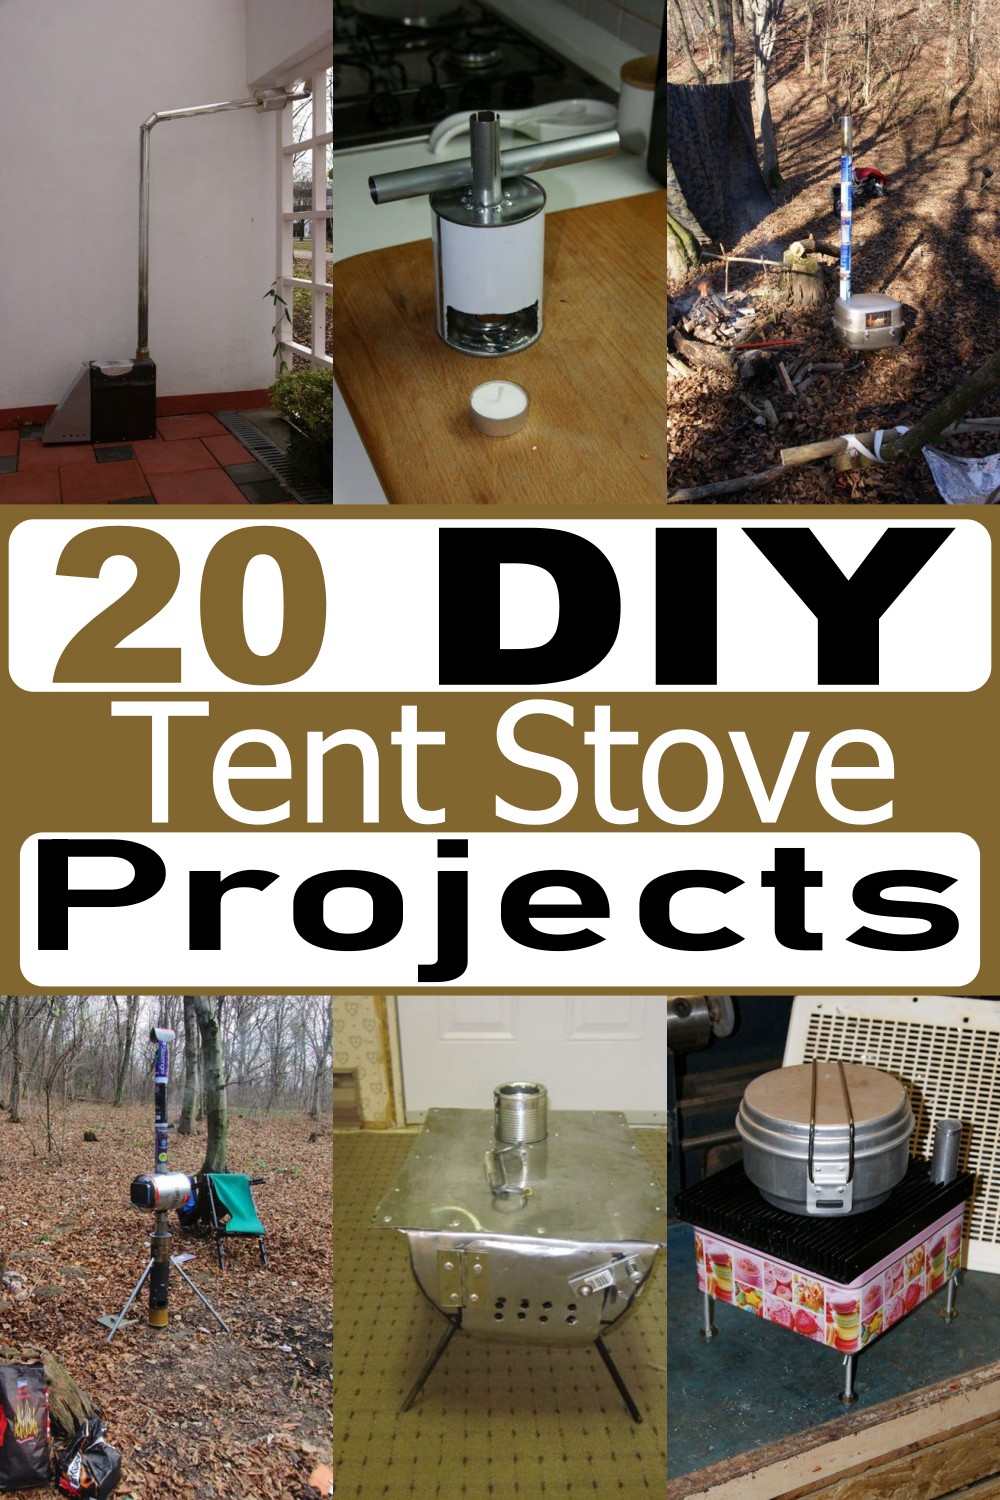 20 DIY Tent Stove Projects